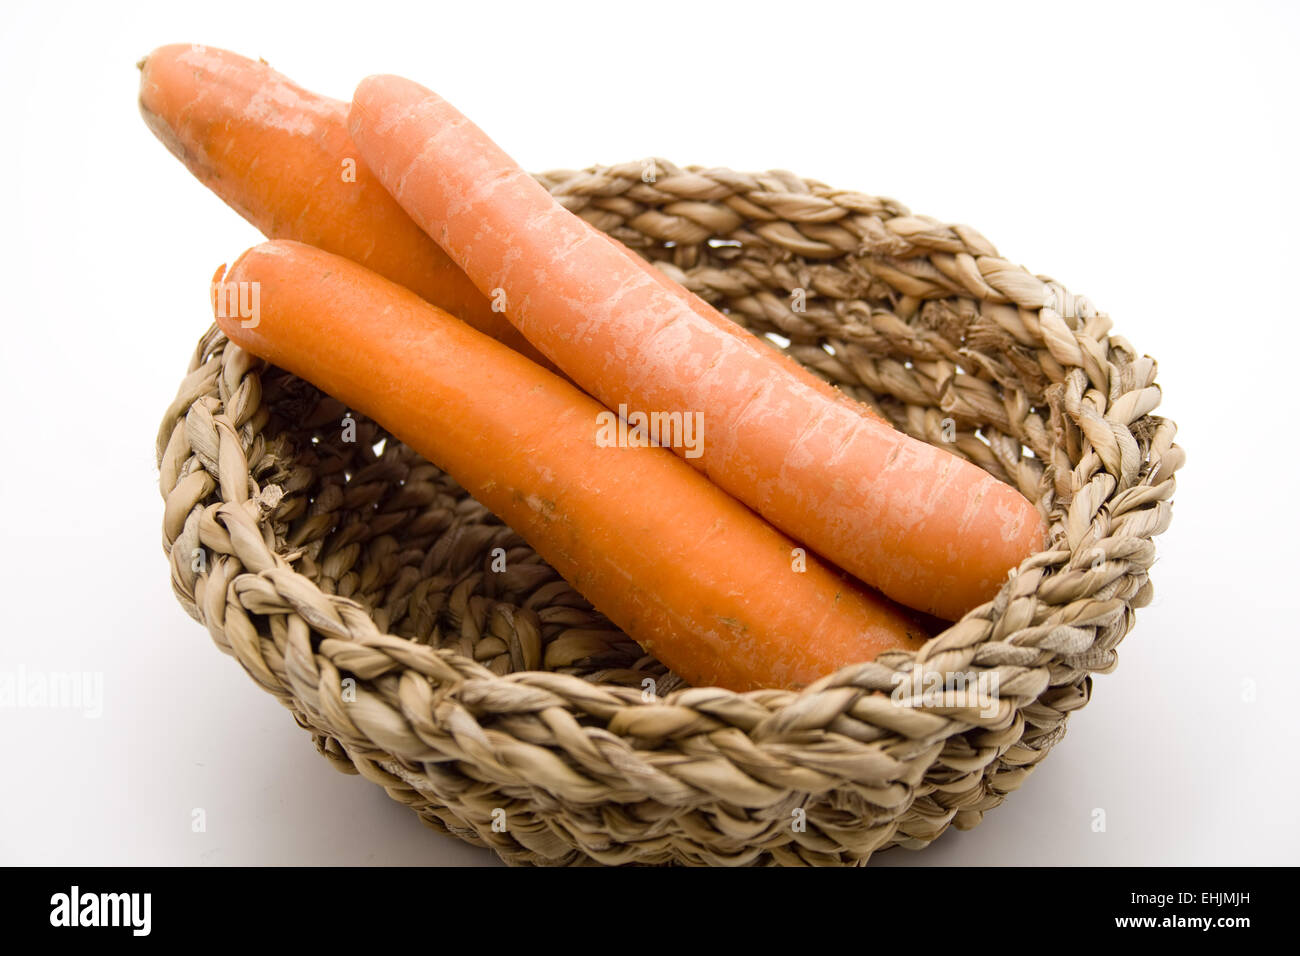 Carrots in the basket Stock Photo